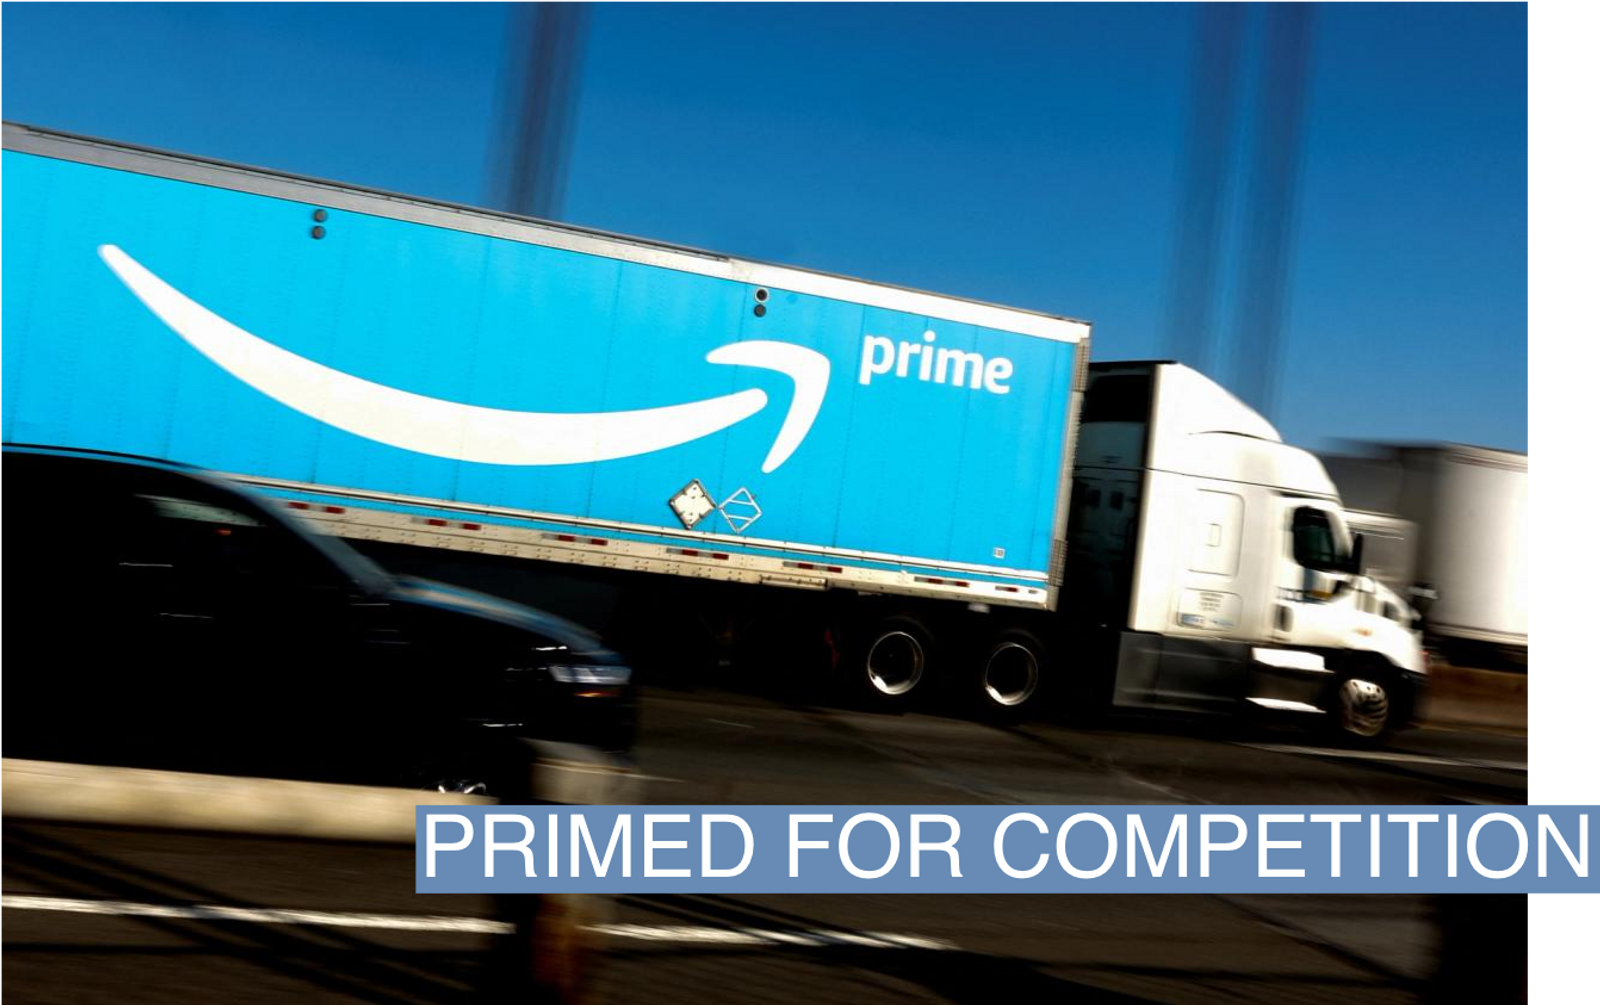 An Amazon Prime truck in New York City.